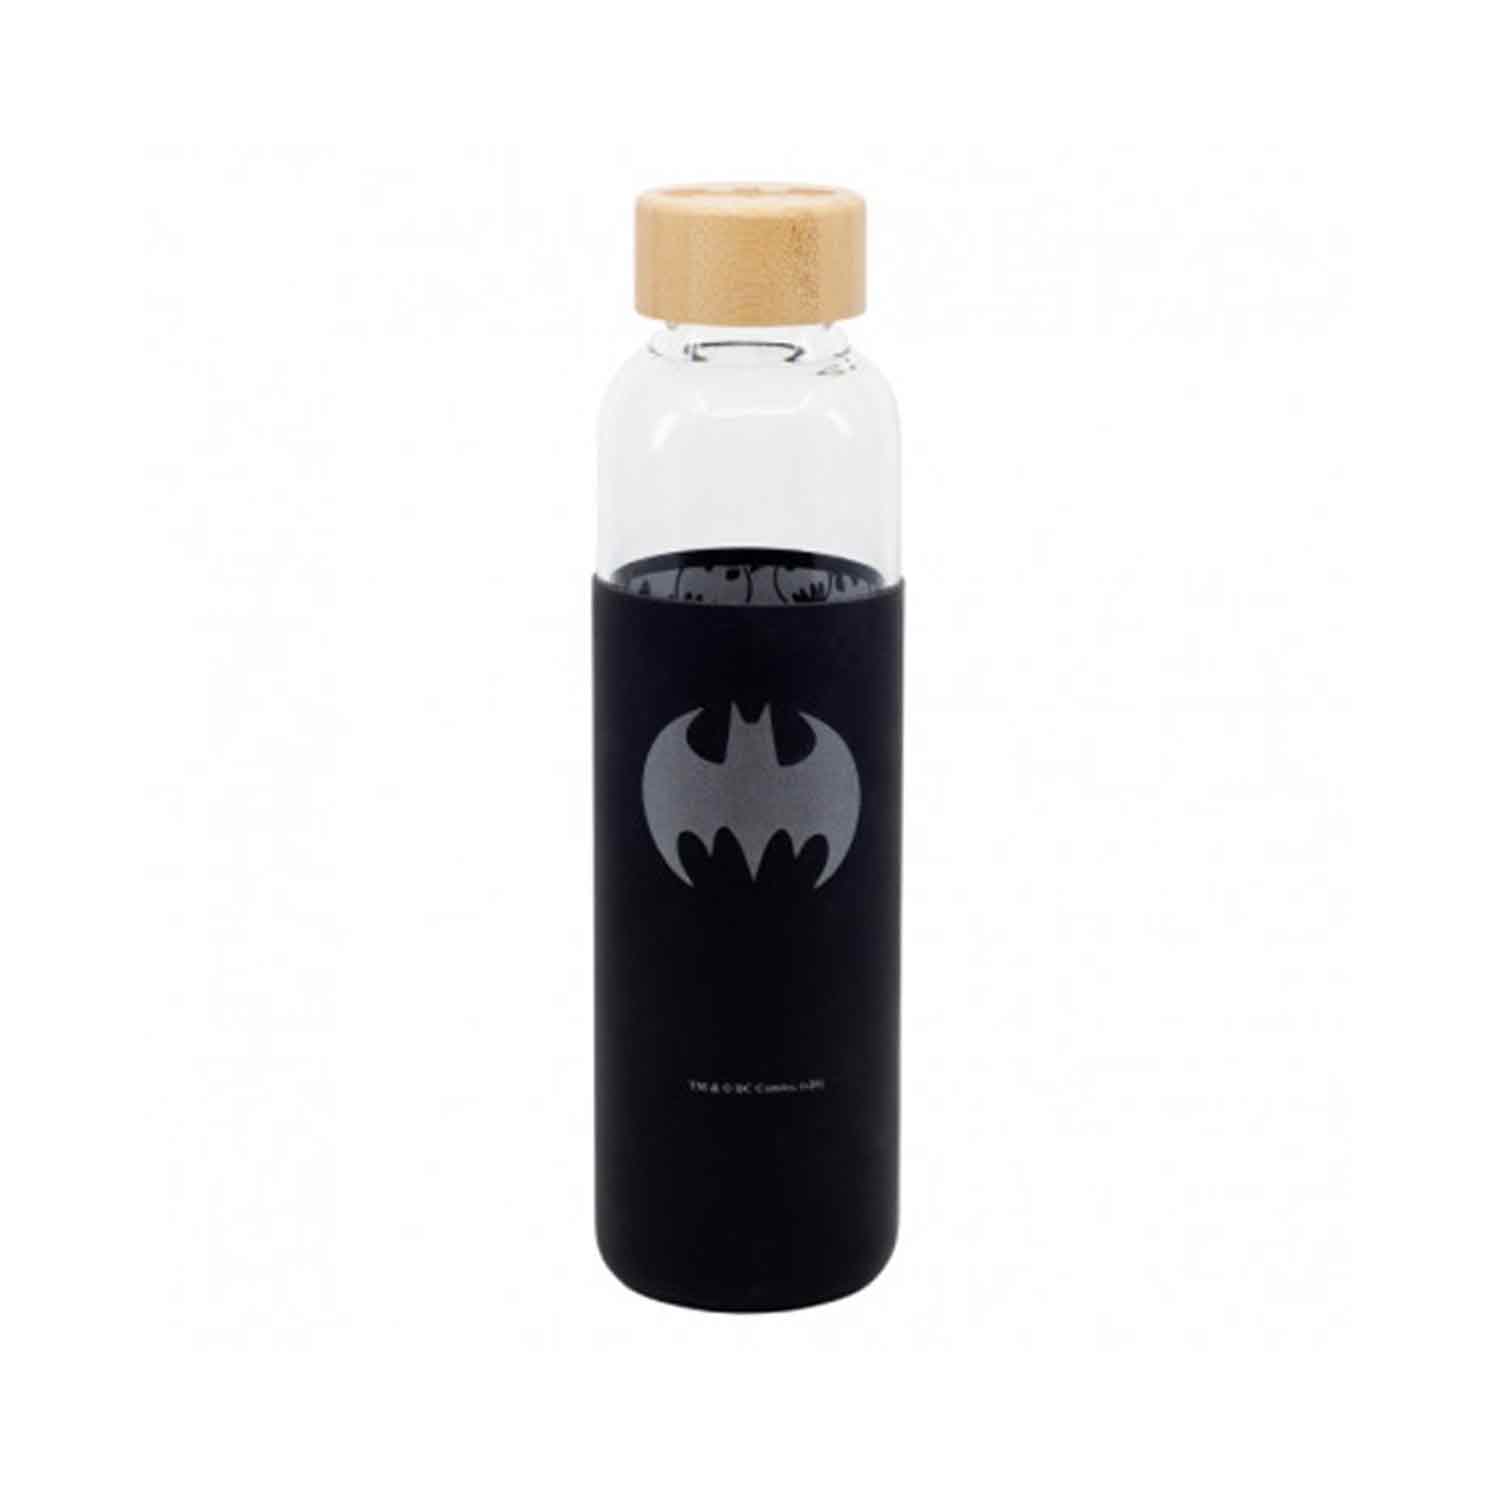 Batman – Batsymbol Glass Bottle with Silicon Cover 585ml – Sunnygeeks